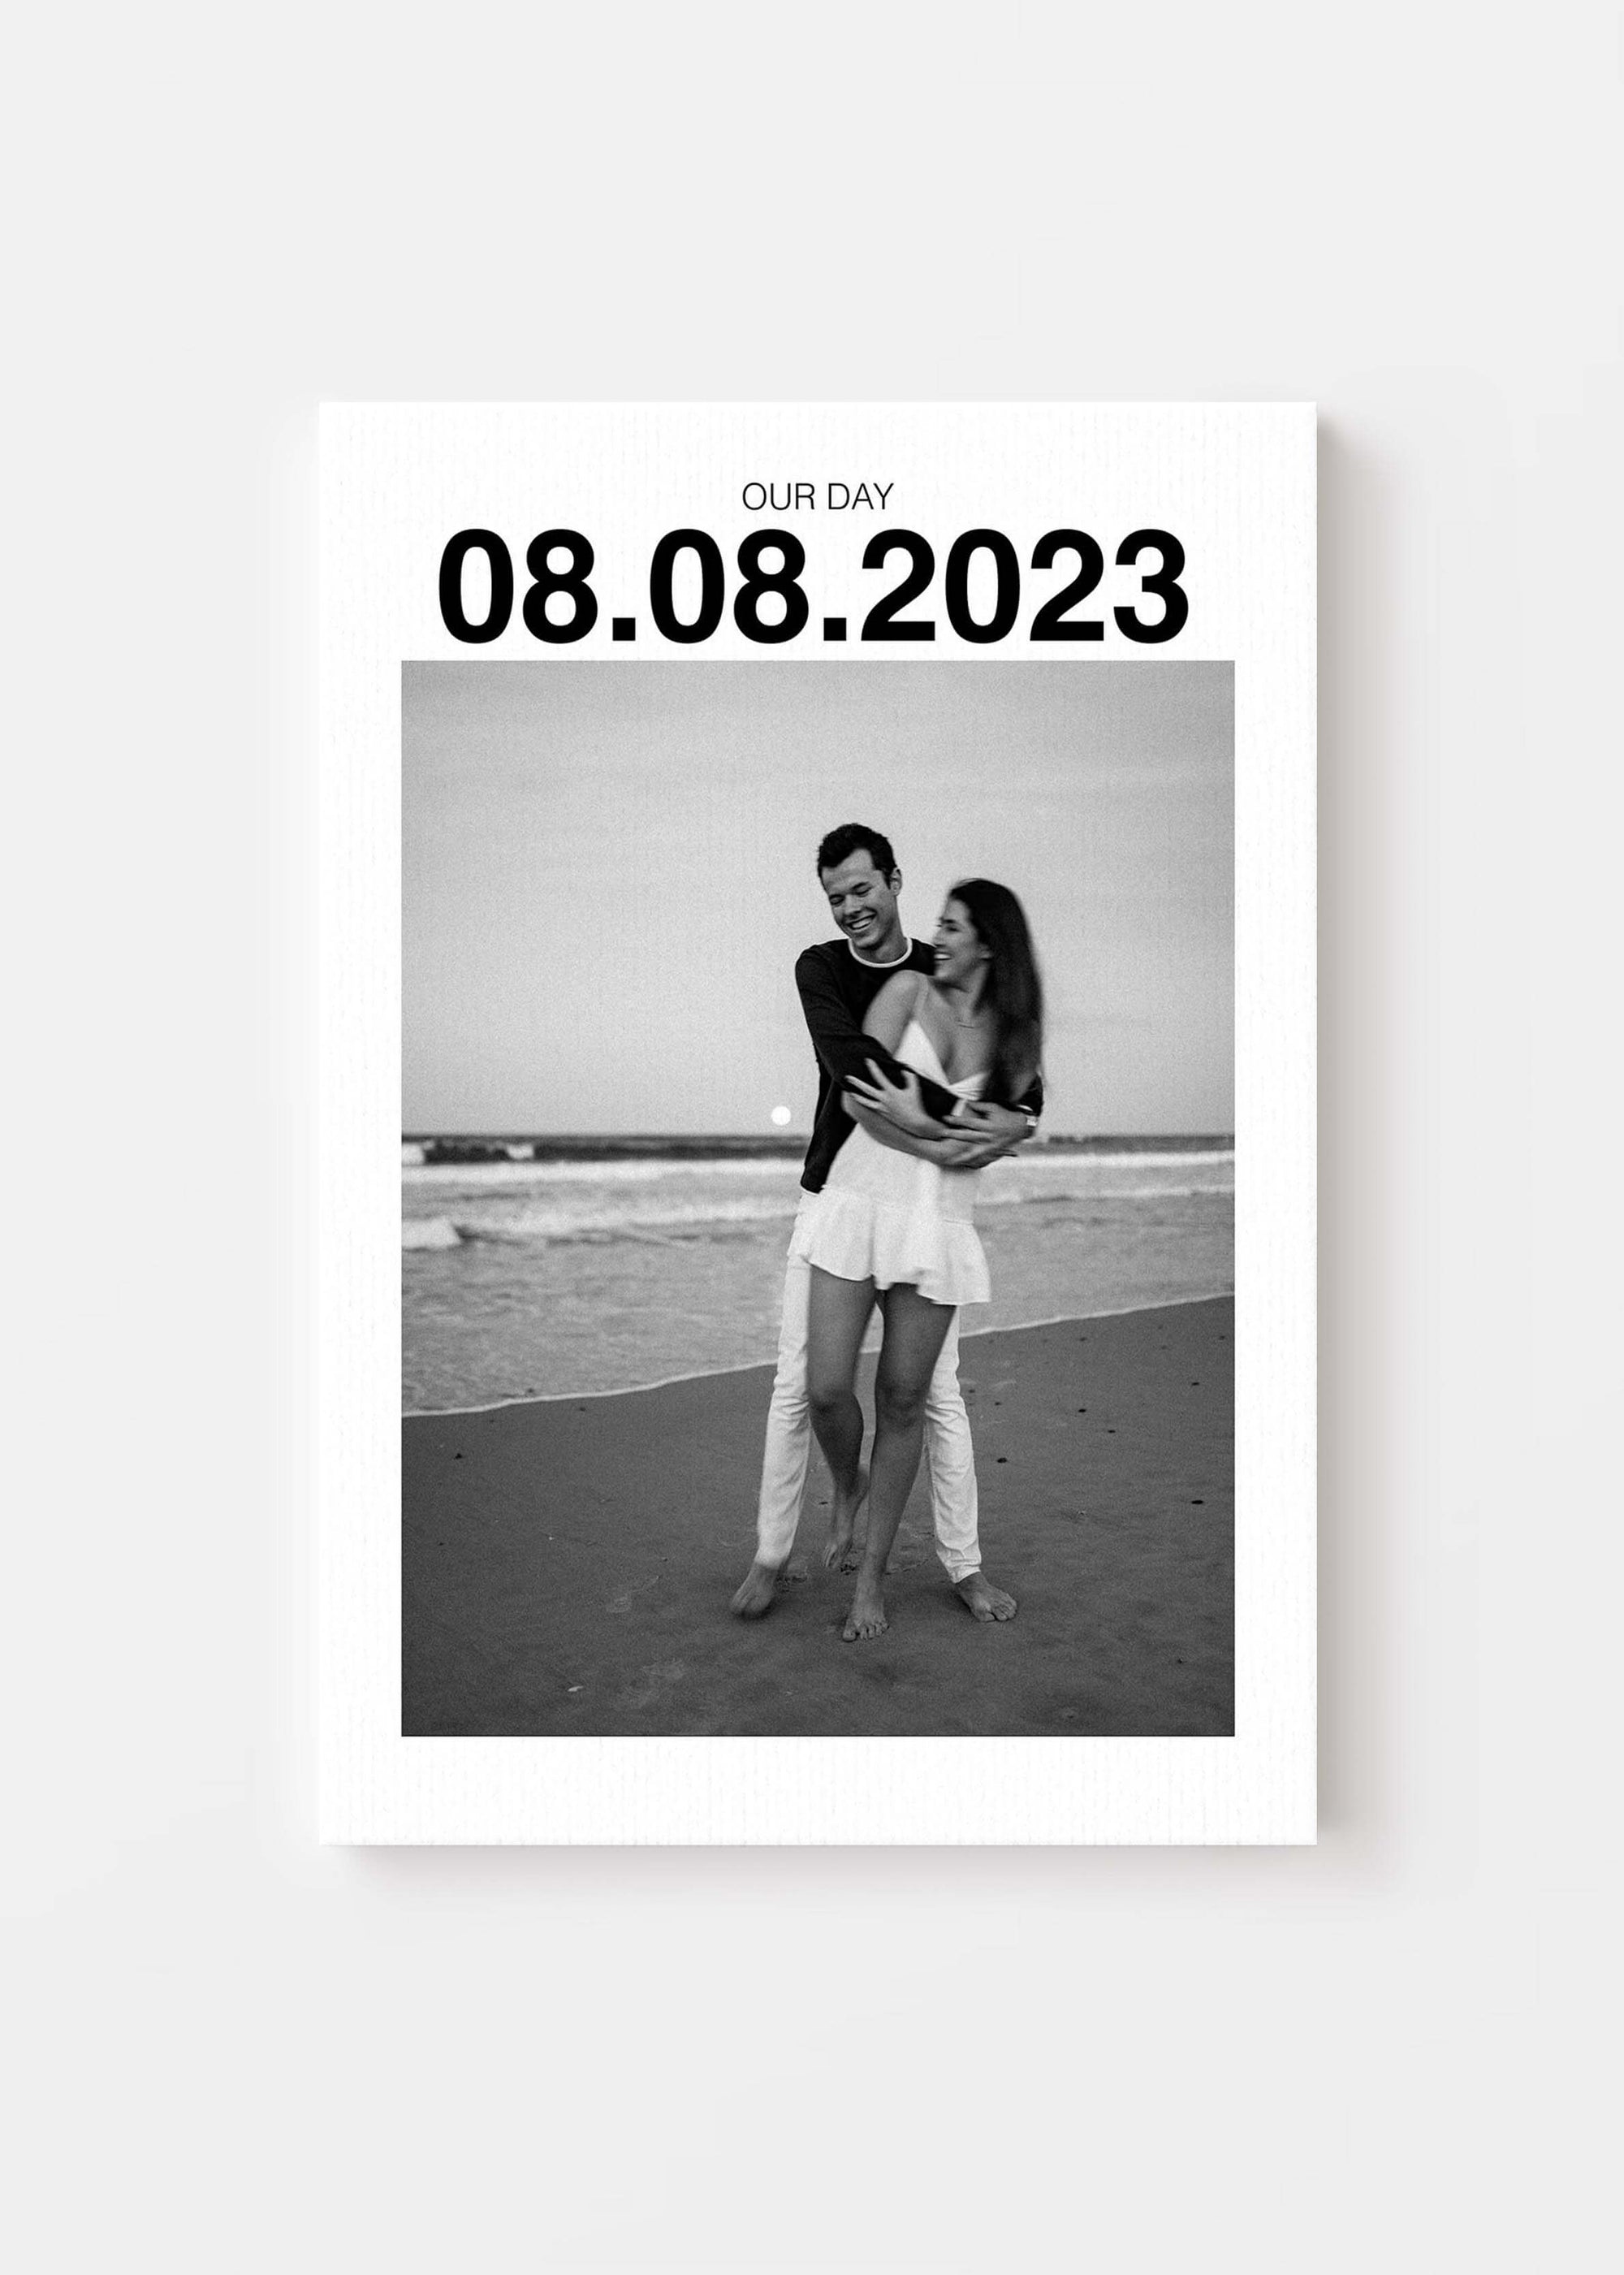 Personalized anniversary gift canvas with large custom date on canvas and a couple on the beach smiling in black and white. Canvas is on a white background.